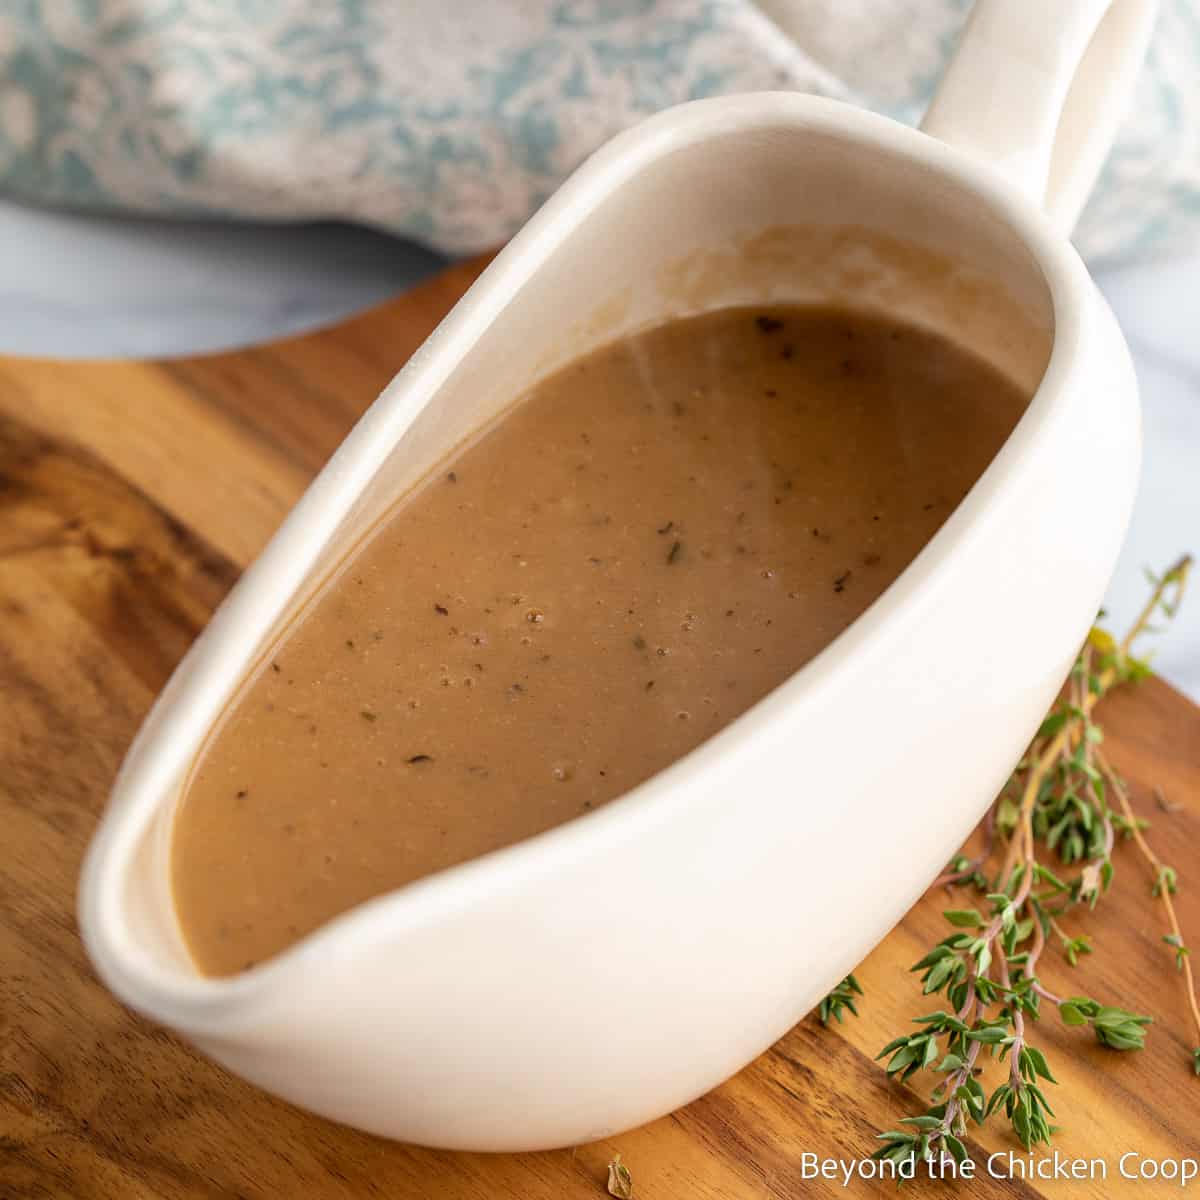 A gravy boat filled with brown gravy.